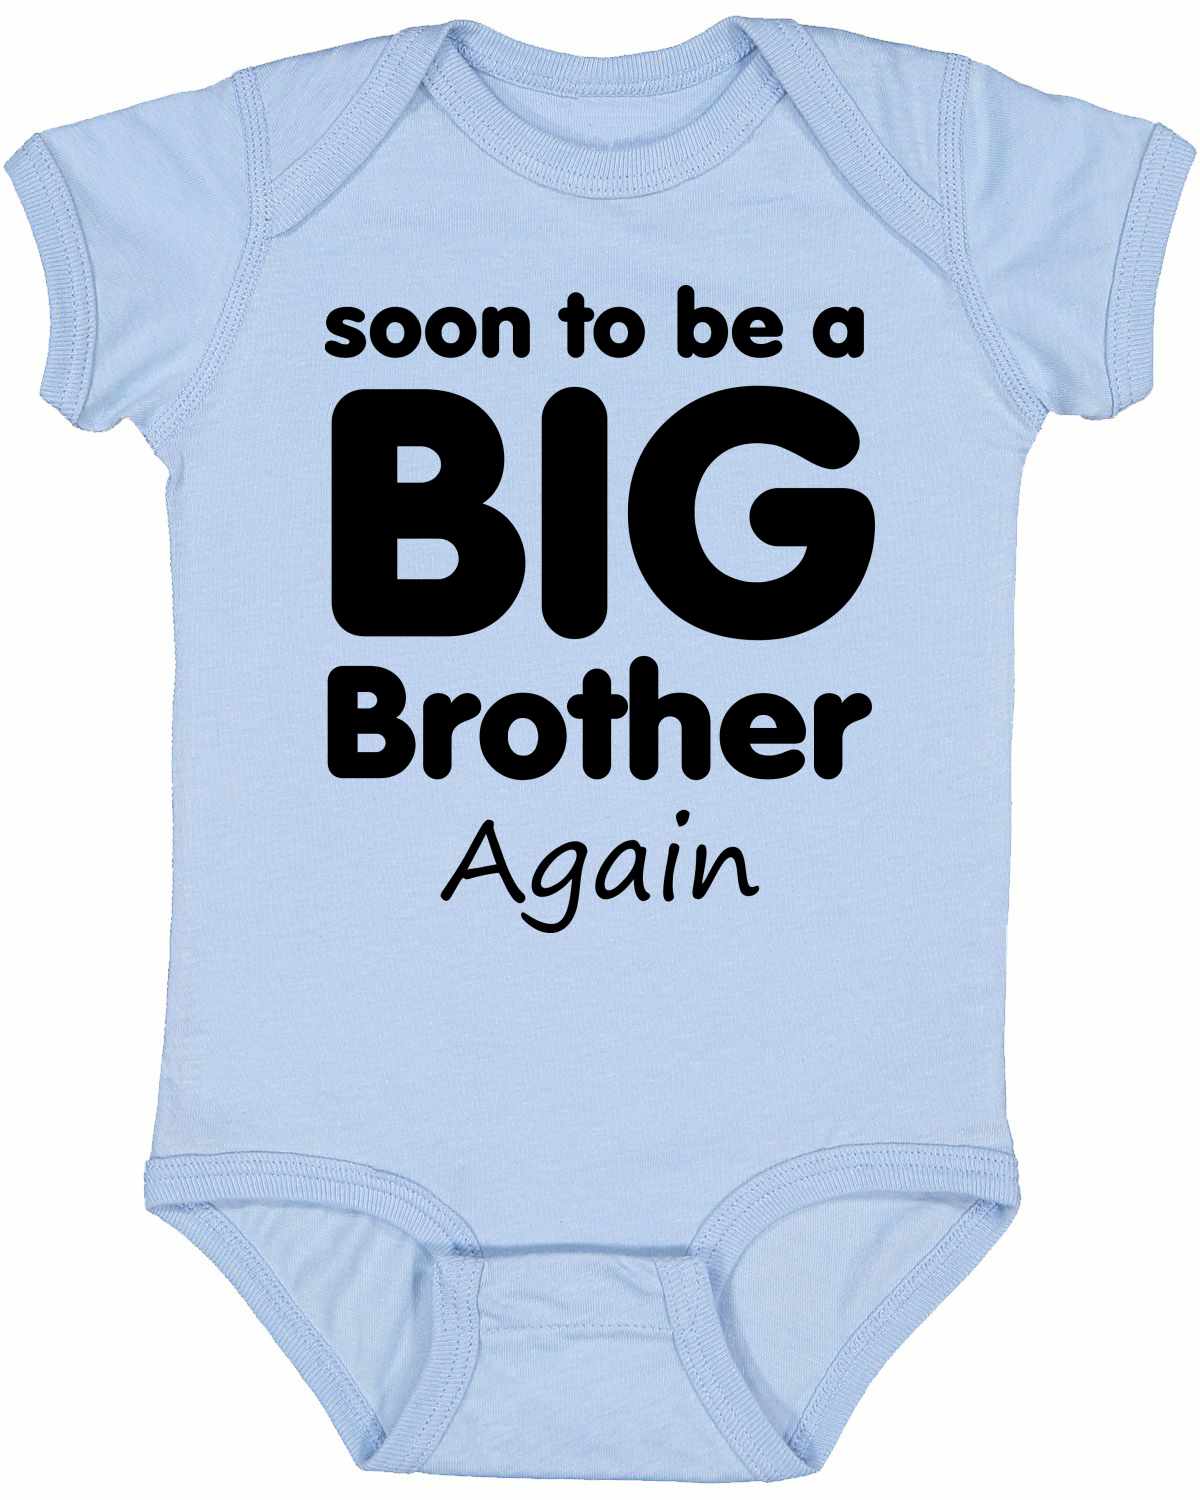 Soon To Be Big Brother Again on Infant BodySuit